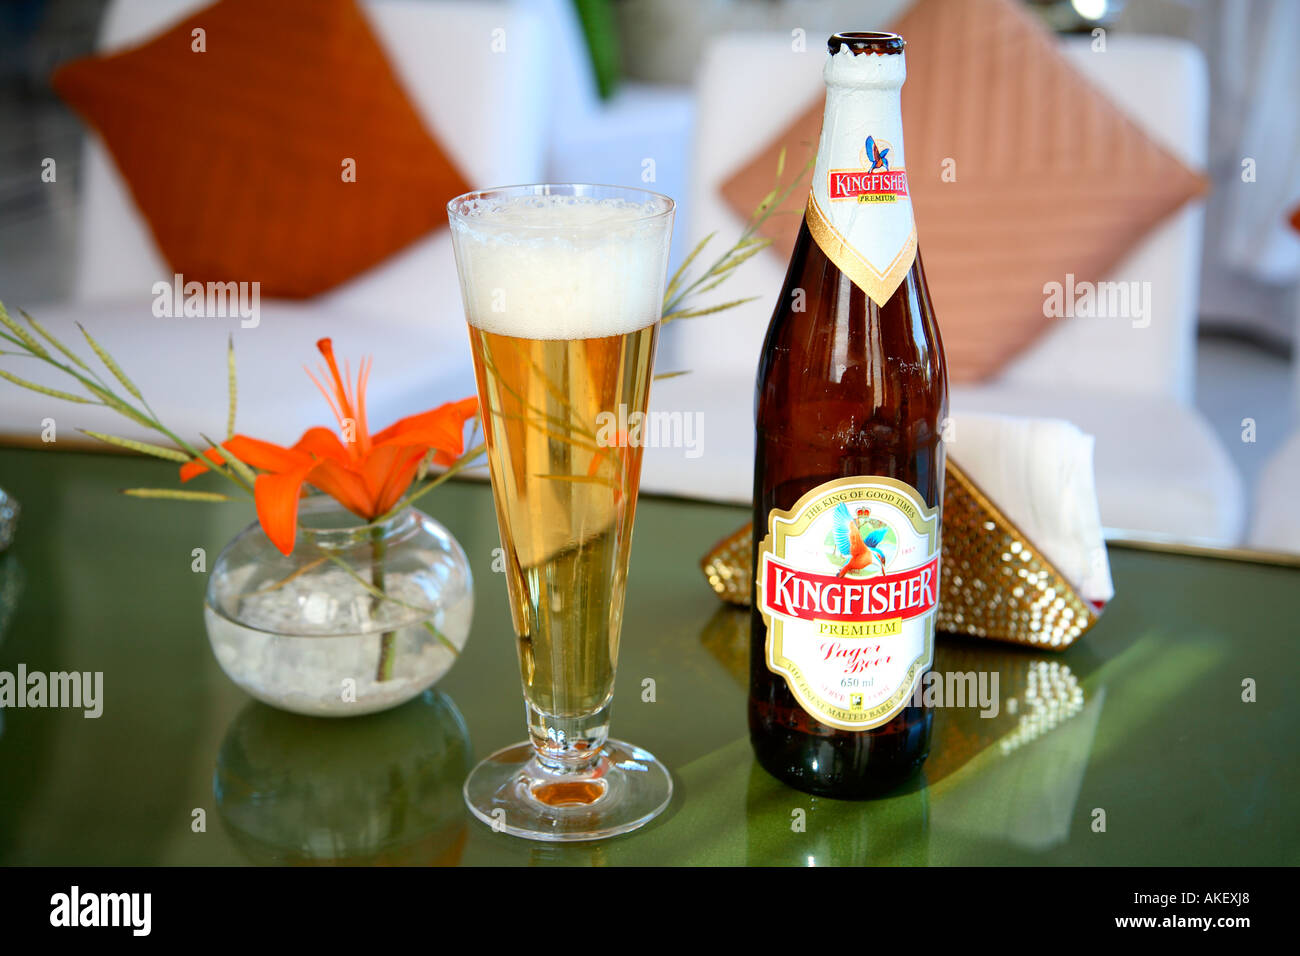 Beer indian beer Kingfisher bottle and glass on table India Stock ...